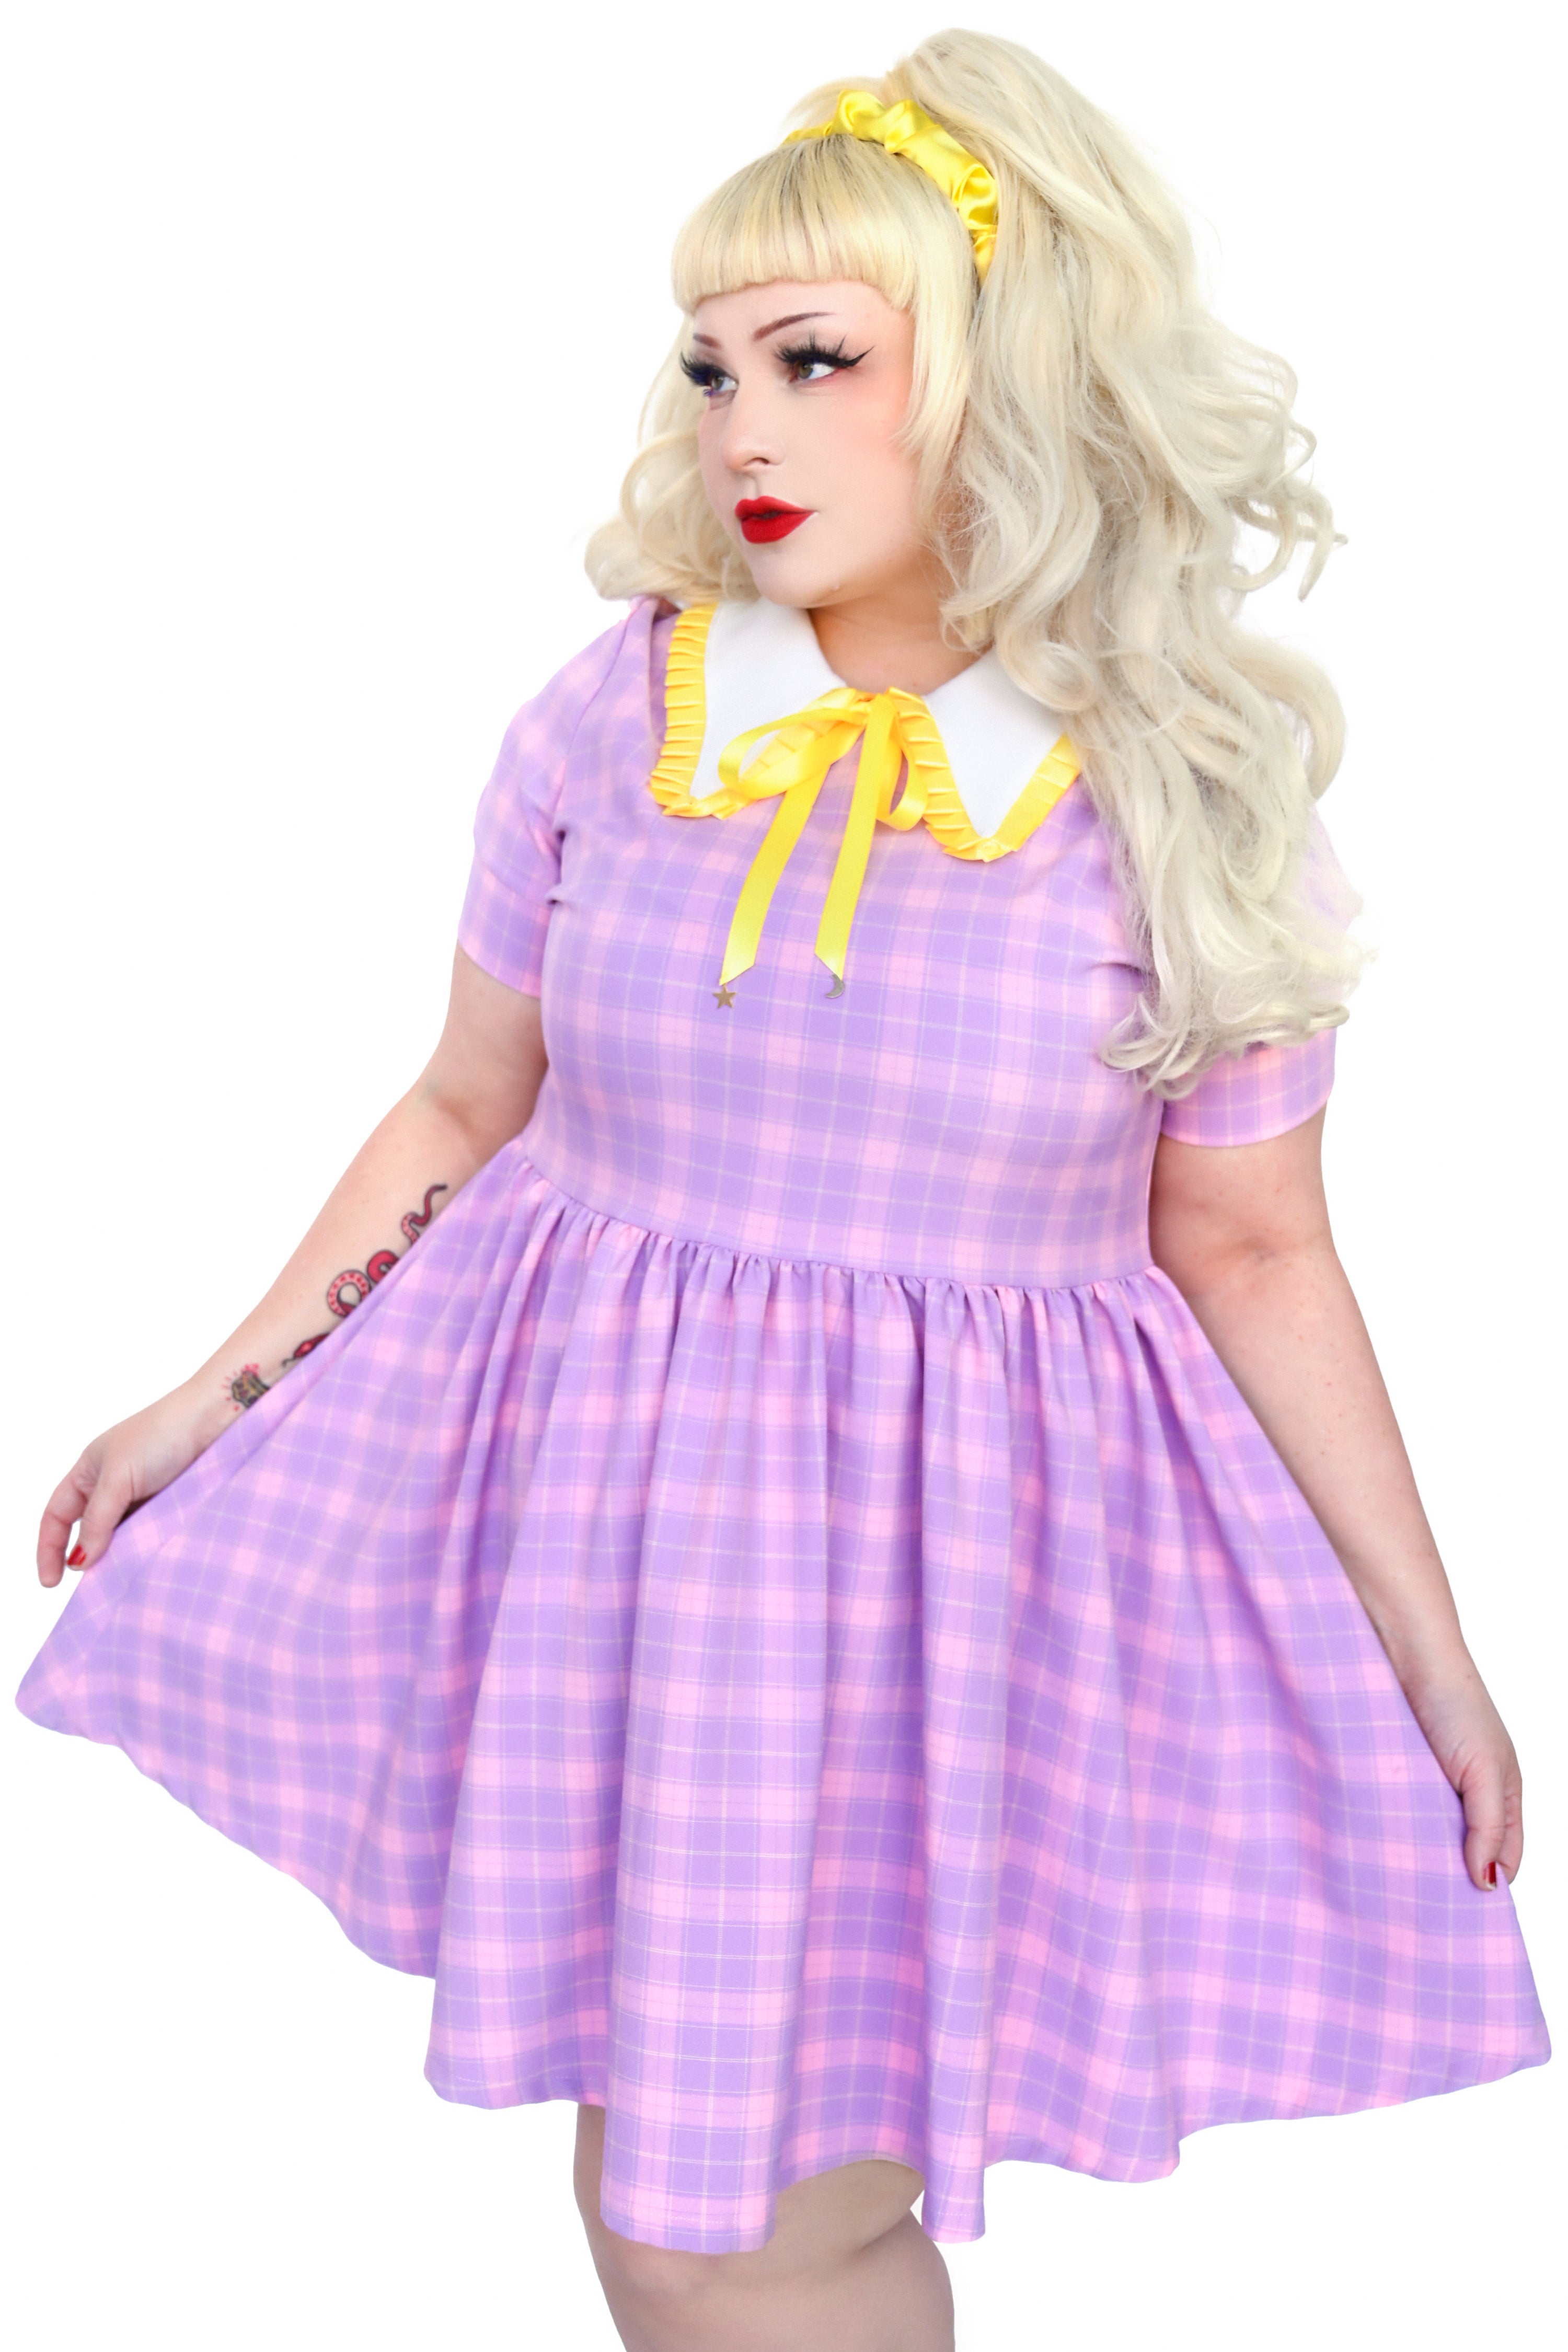 Charmed Collared Dress - Sizes XS/S/M left!